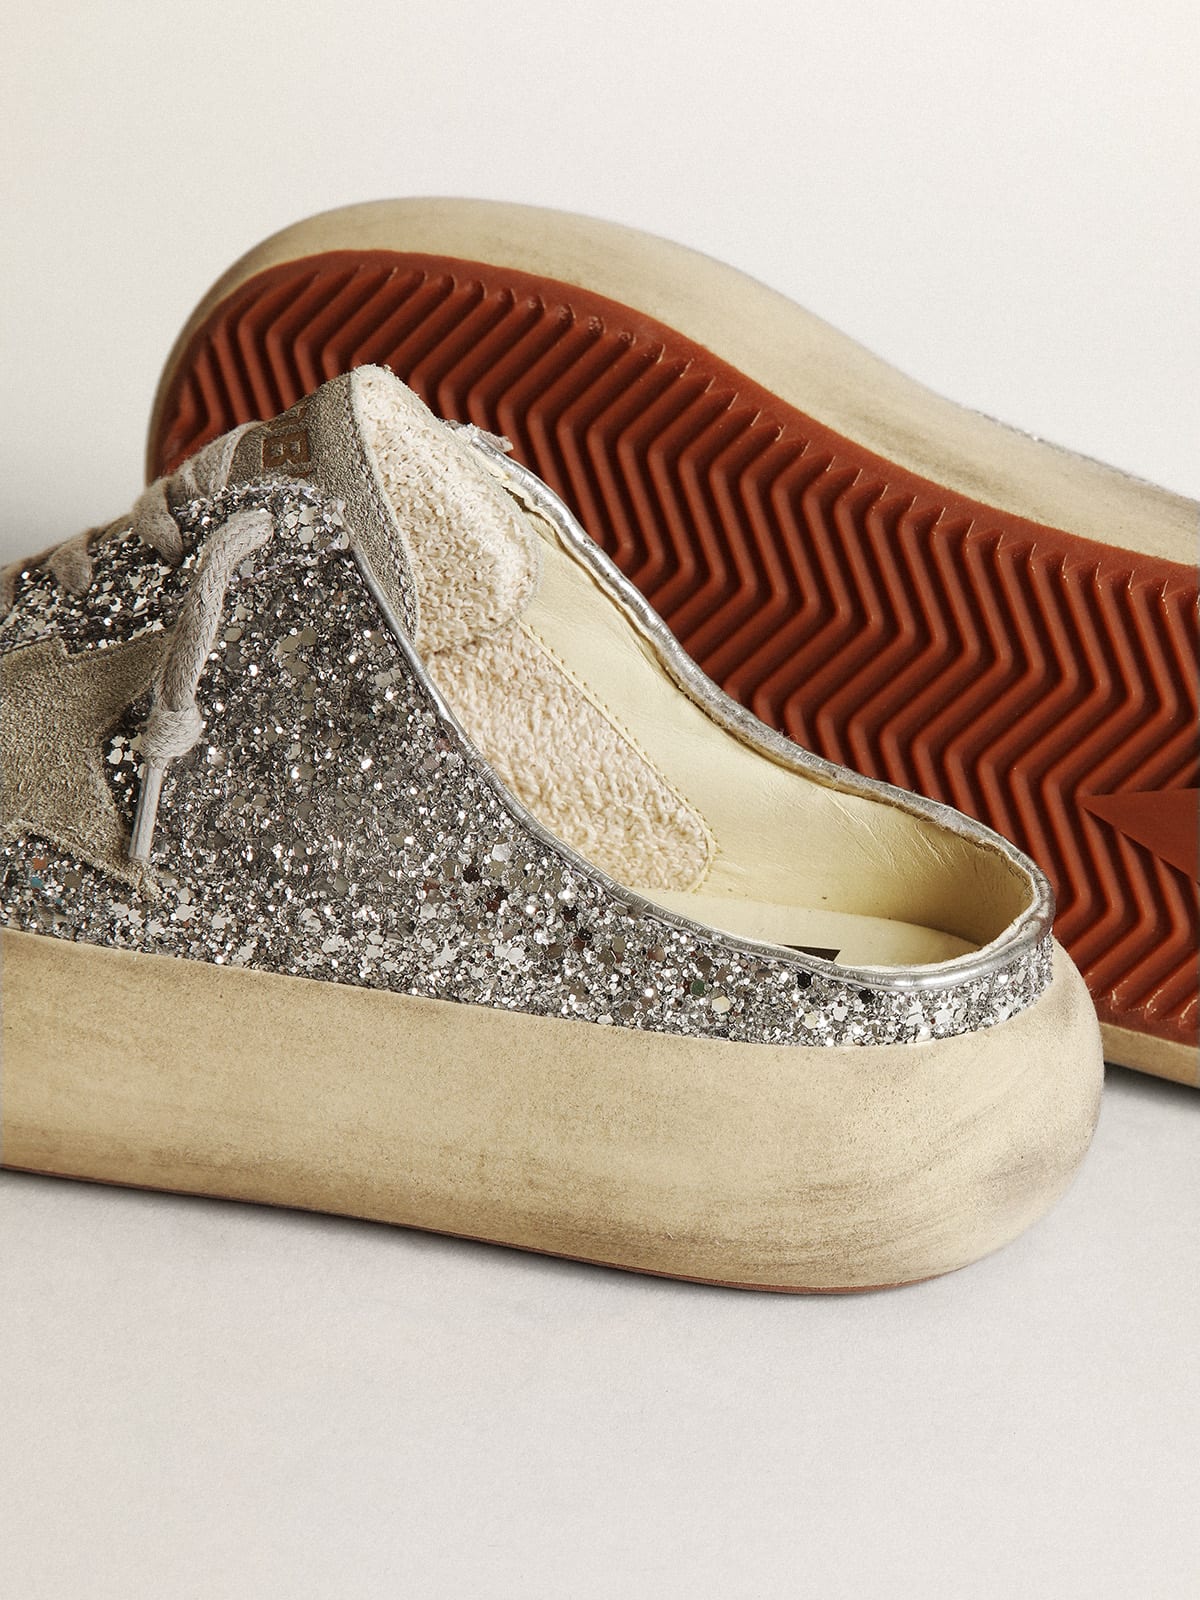 Golden Goose - Women's Space-Star Sabot in glitter with ice-gray star and tab in 